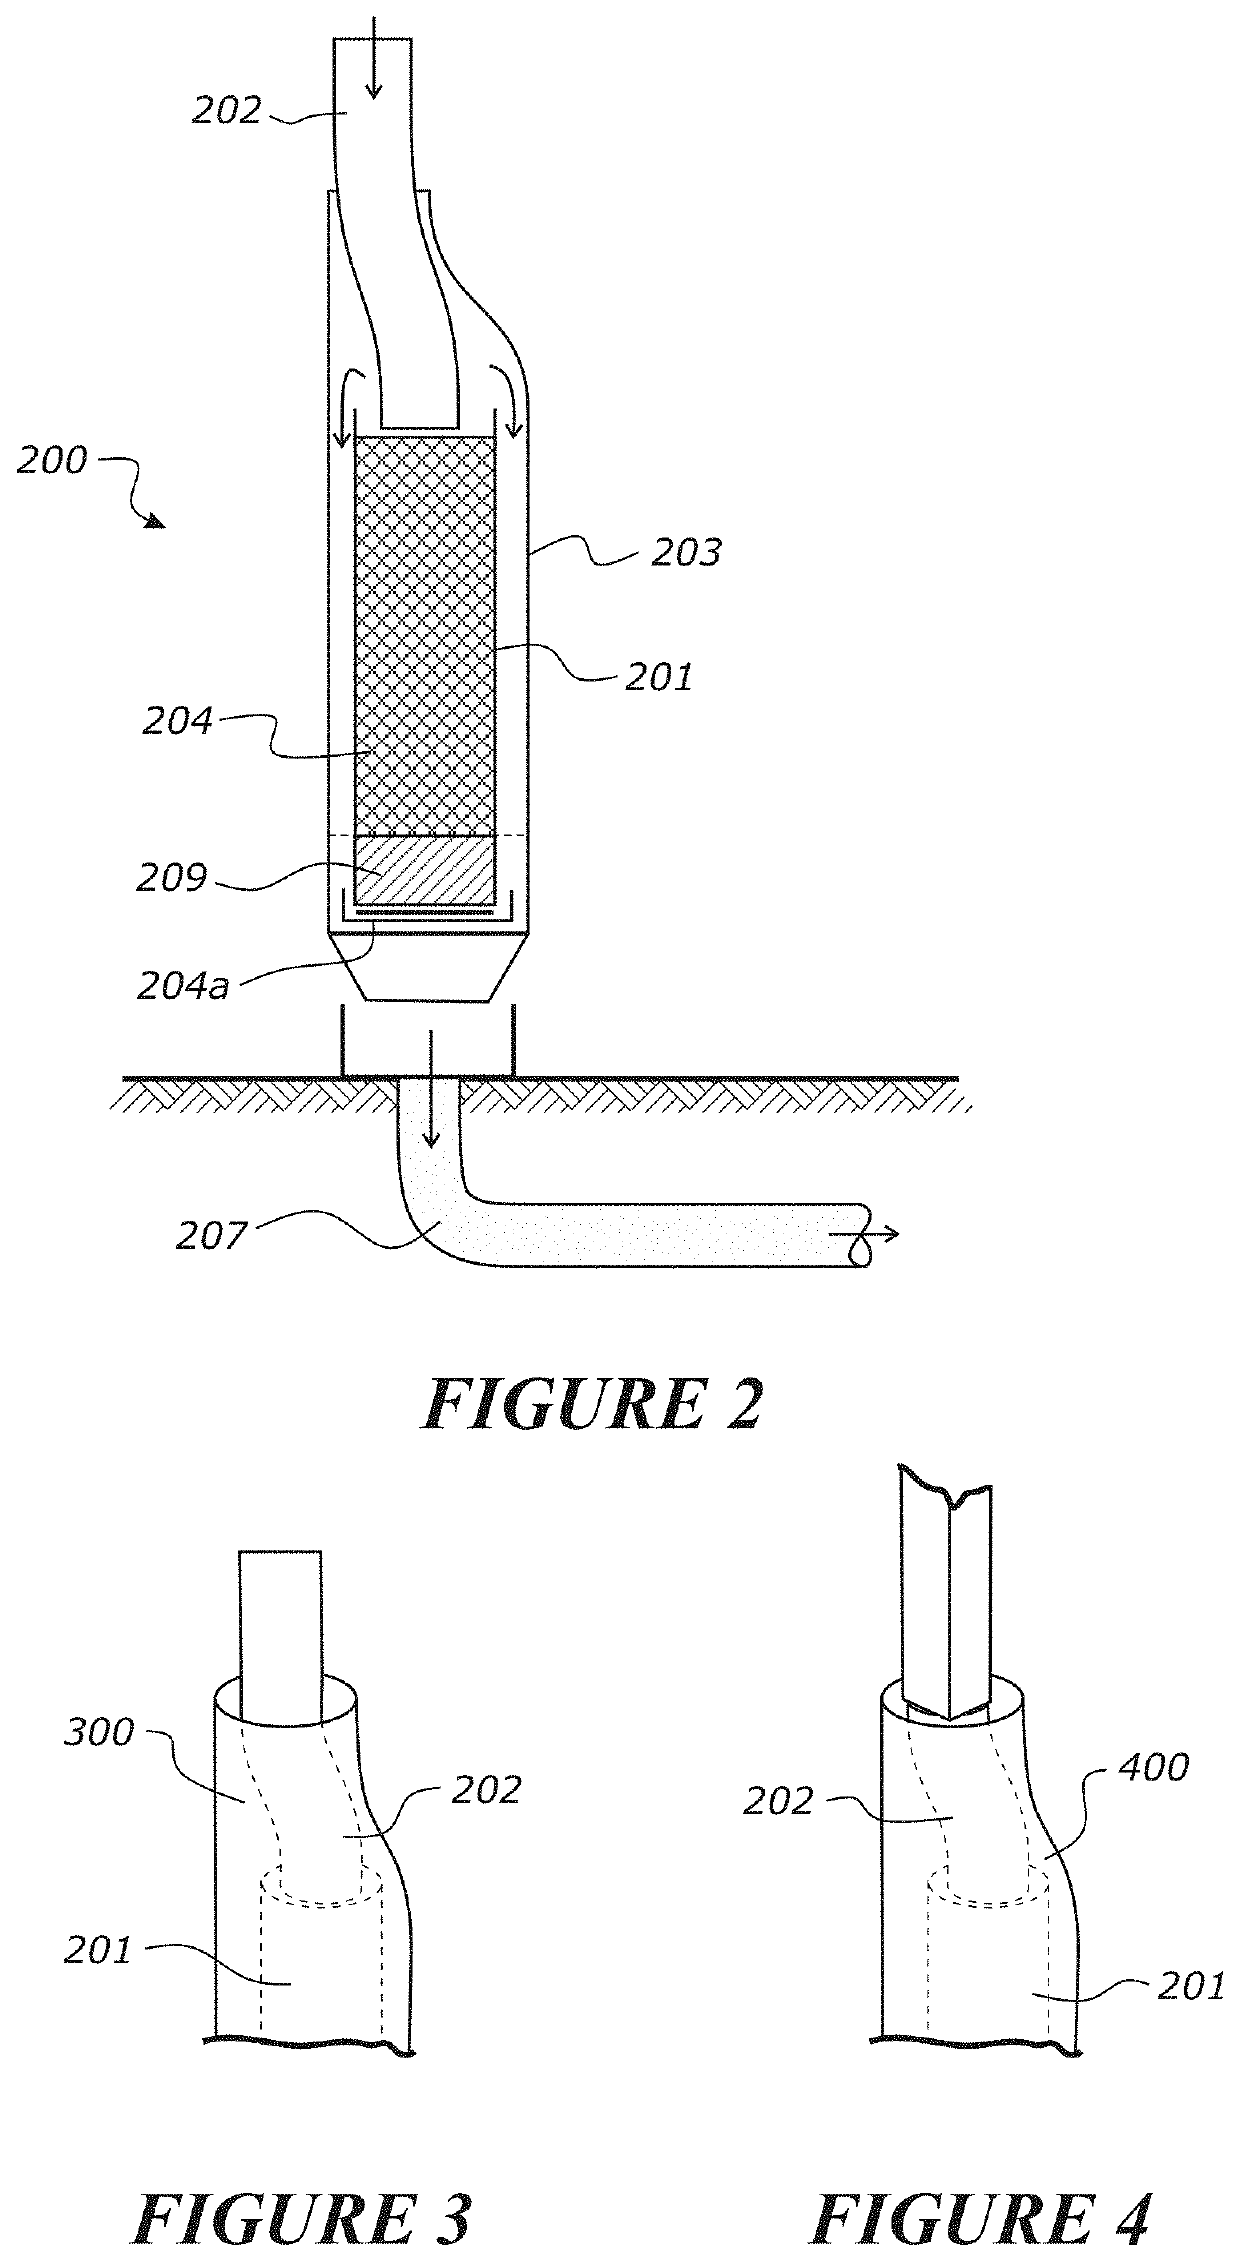 A device for treating roof runoff